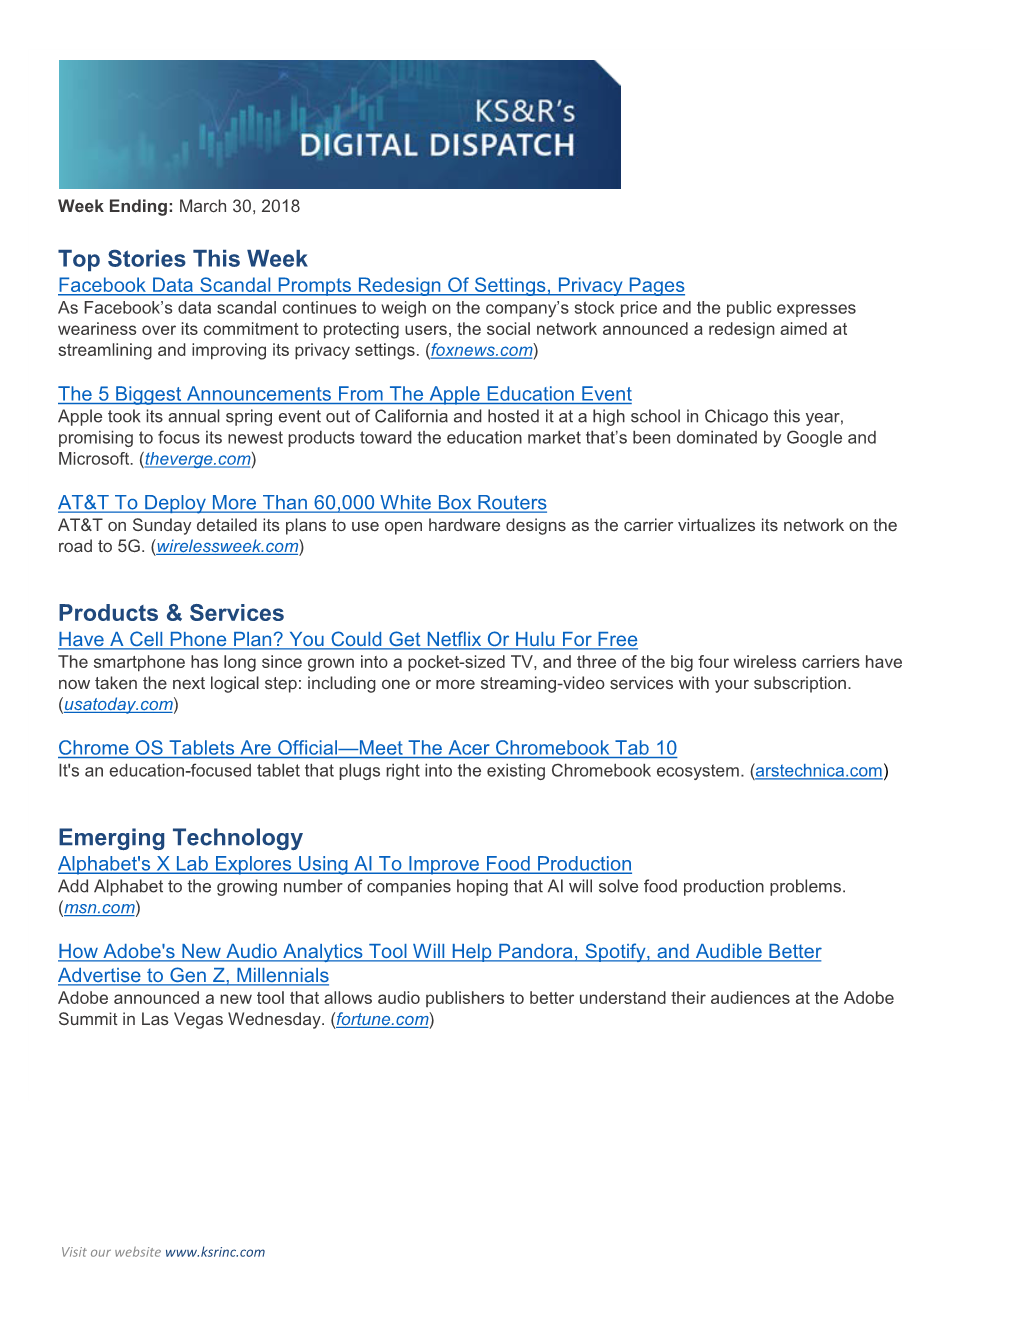 Top Stories This Week Products & Services Emerging Technology